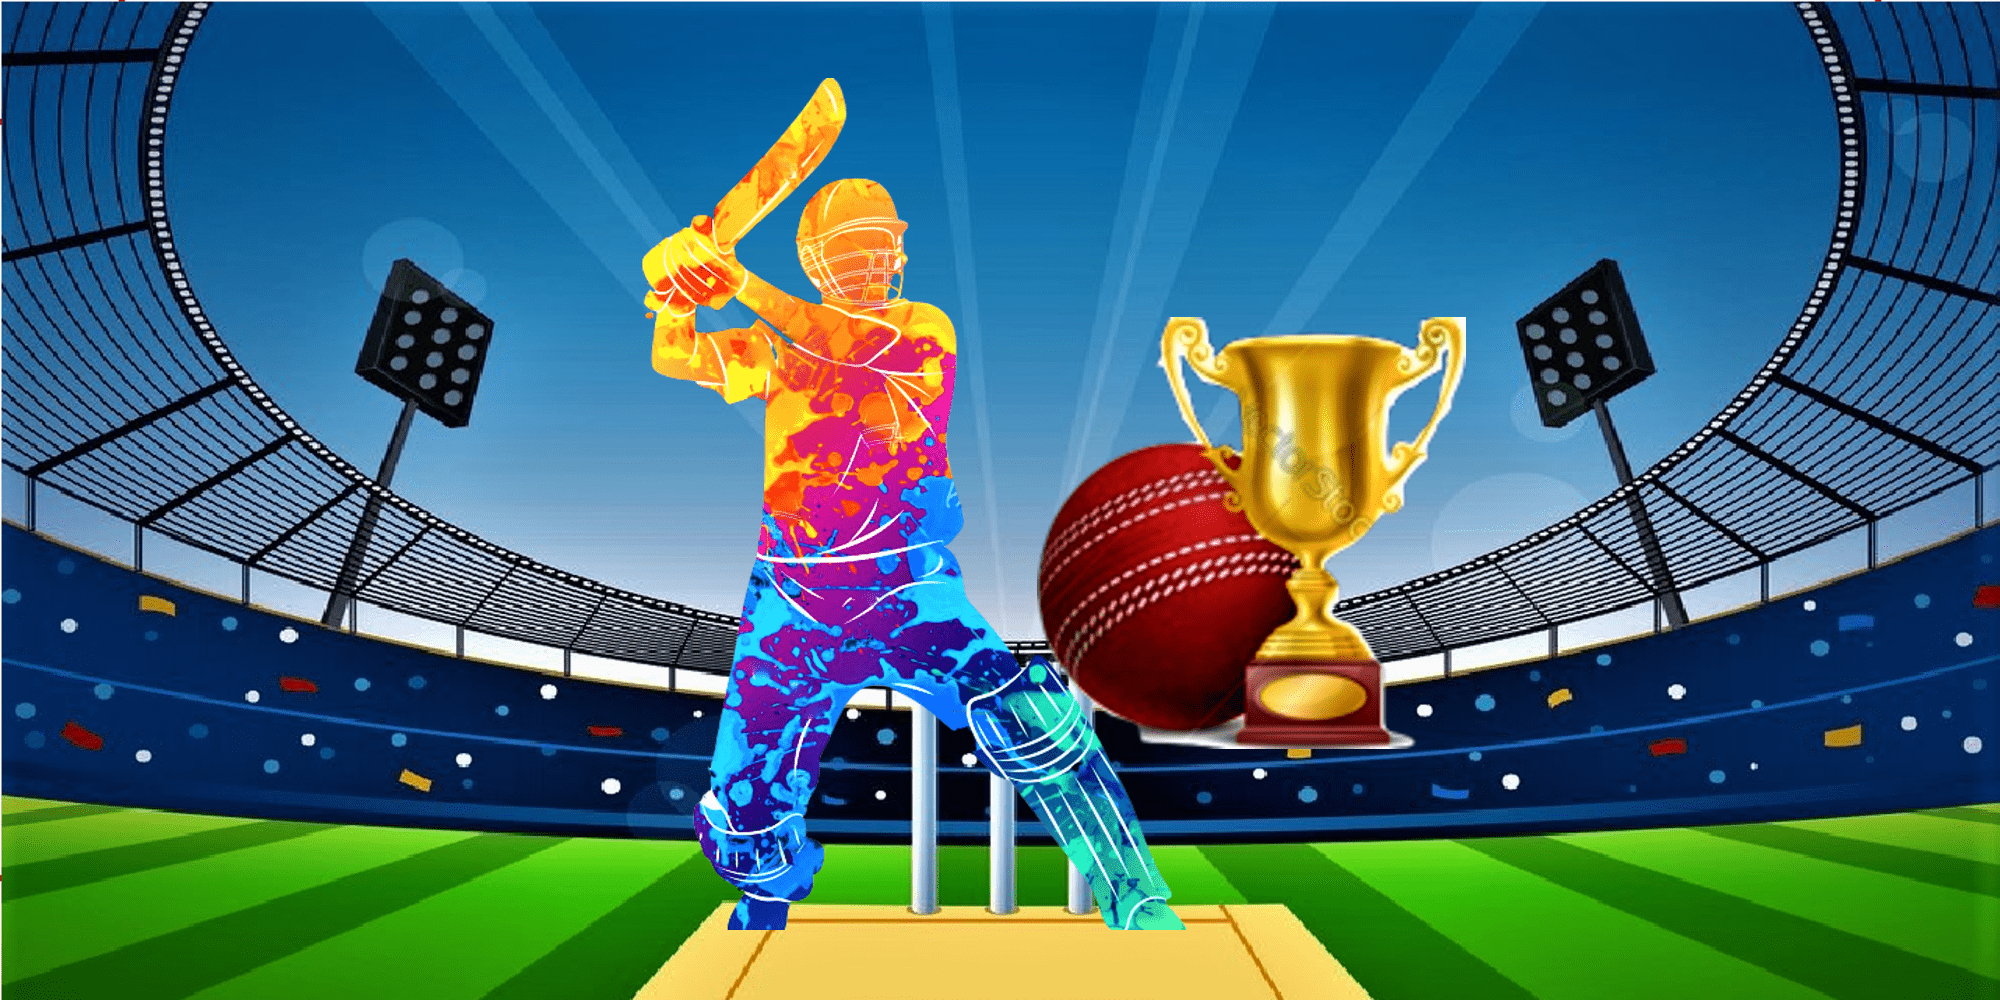 What are the most important tips that you need to consider to play fantasy cricket successfully?